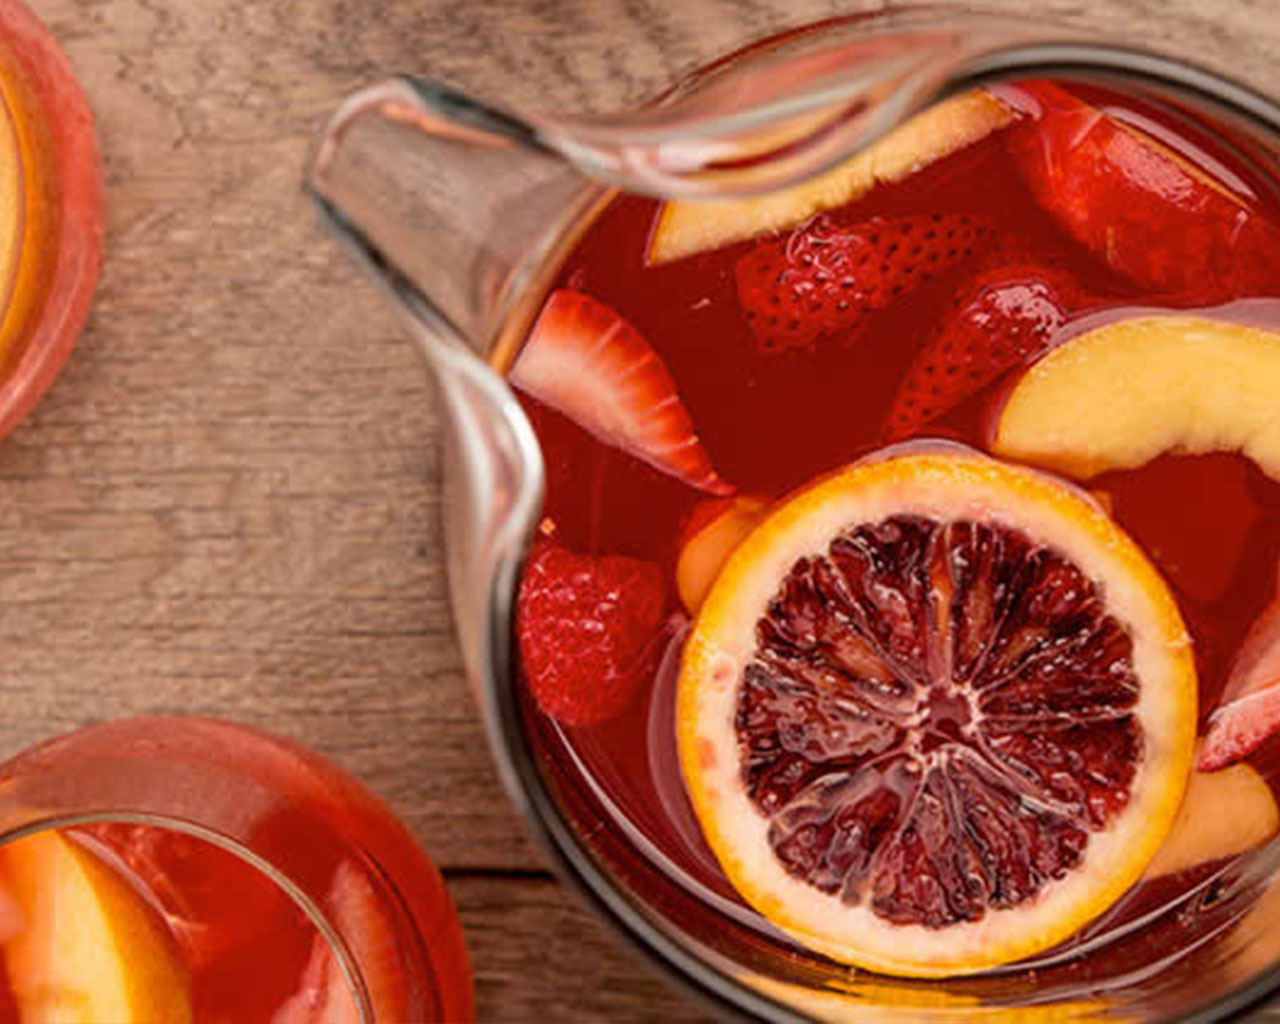 https://www.coca-cola.com/content/dam/onexp/us/en/brands/simply/recipes-and-mixology/juices-and-drinks/juice-and-drinks-lp/USA_simply_fruit_punch_sangria_campaign_card_right_desktop_1280x1024.jpg